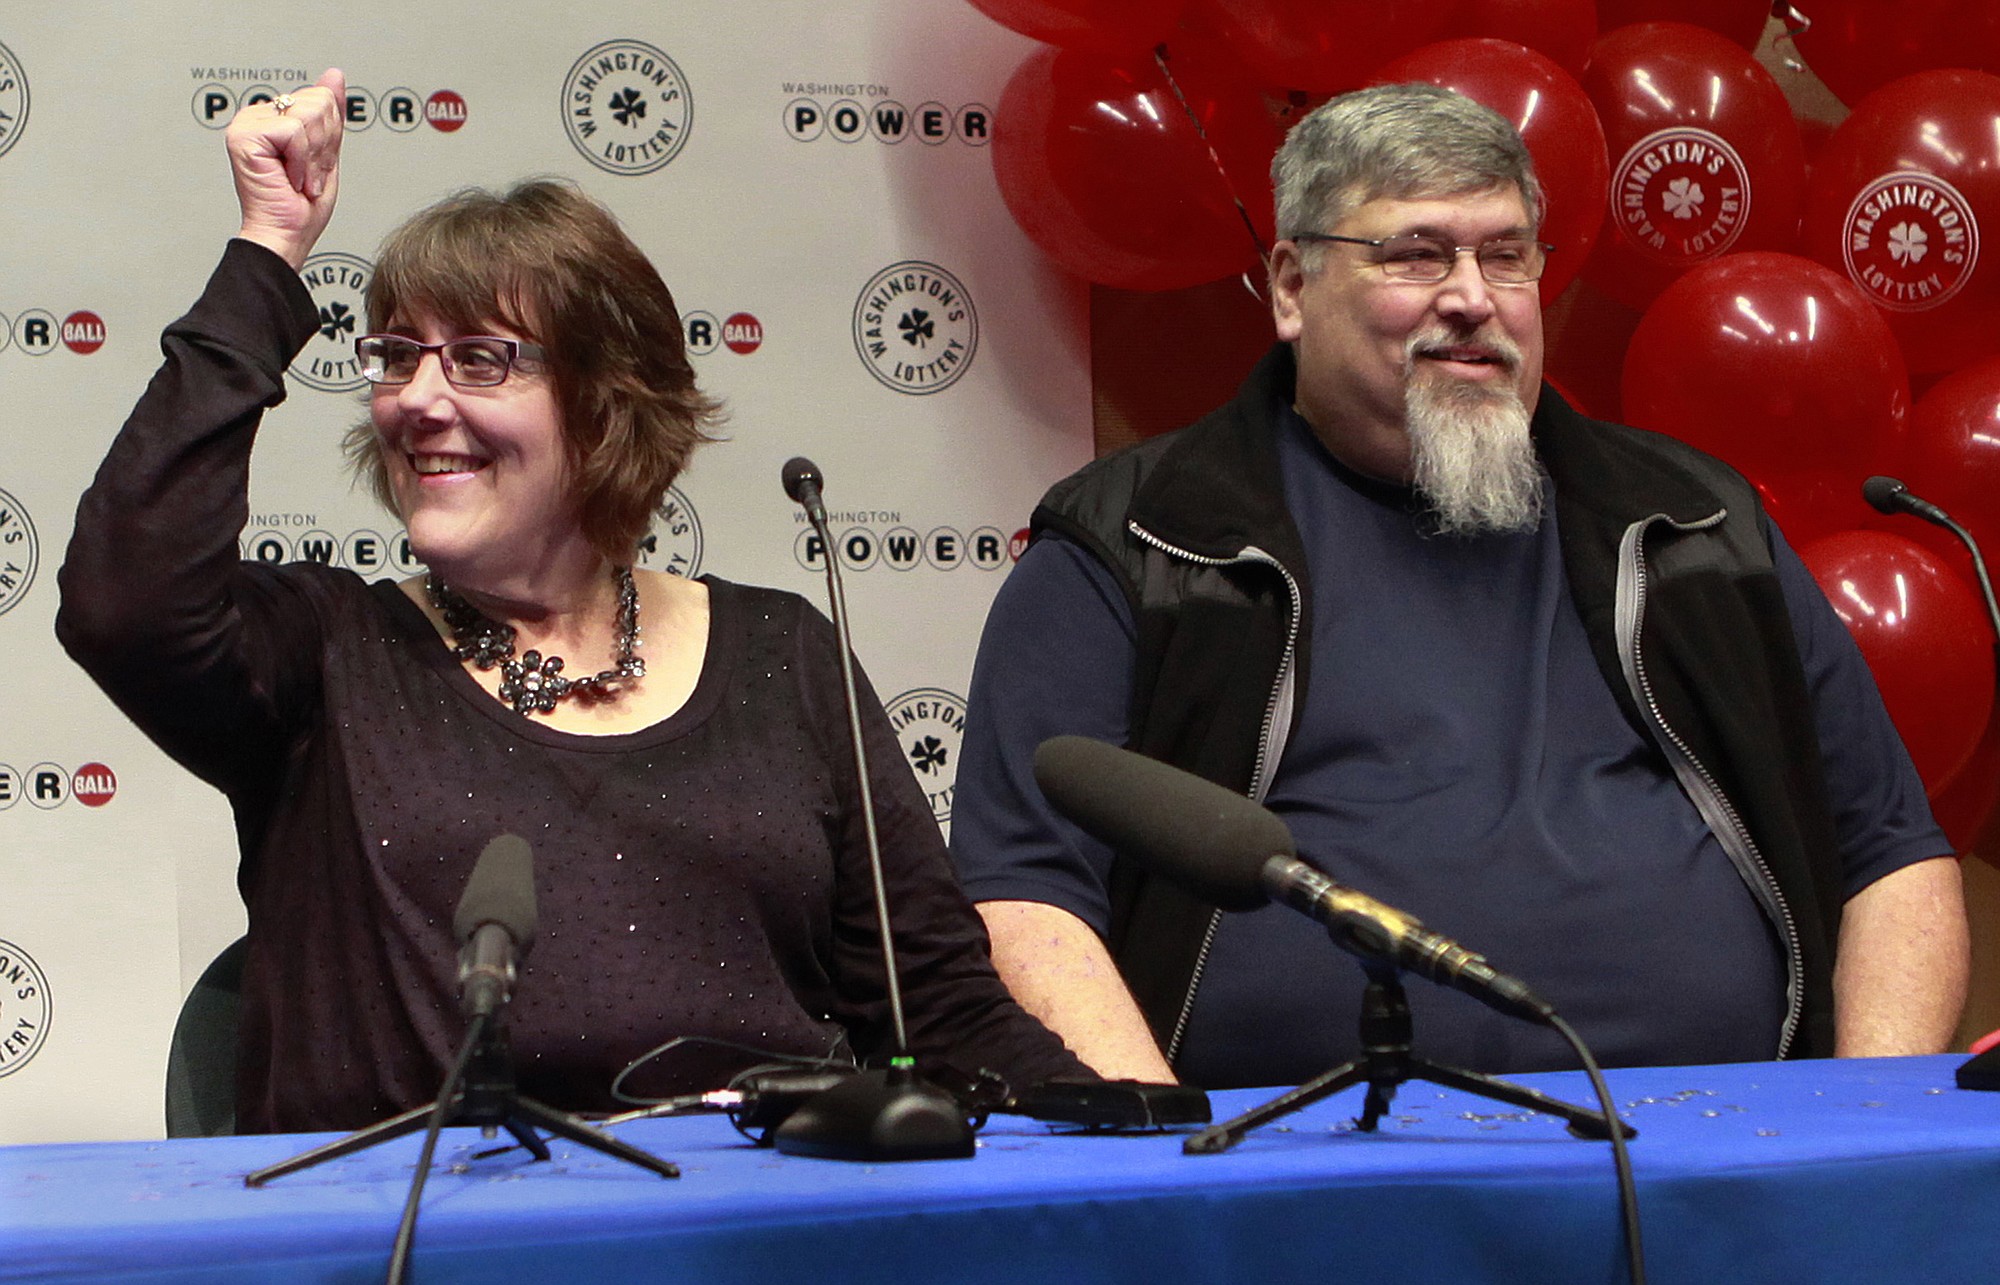 Lisa N. and Everett Quam of Auburn address a Thursday press conference at the Washington State Lottery headquarters in Olympia after selecting the winner numbers in the $90 million Powerball jackpot over the weekend.